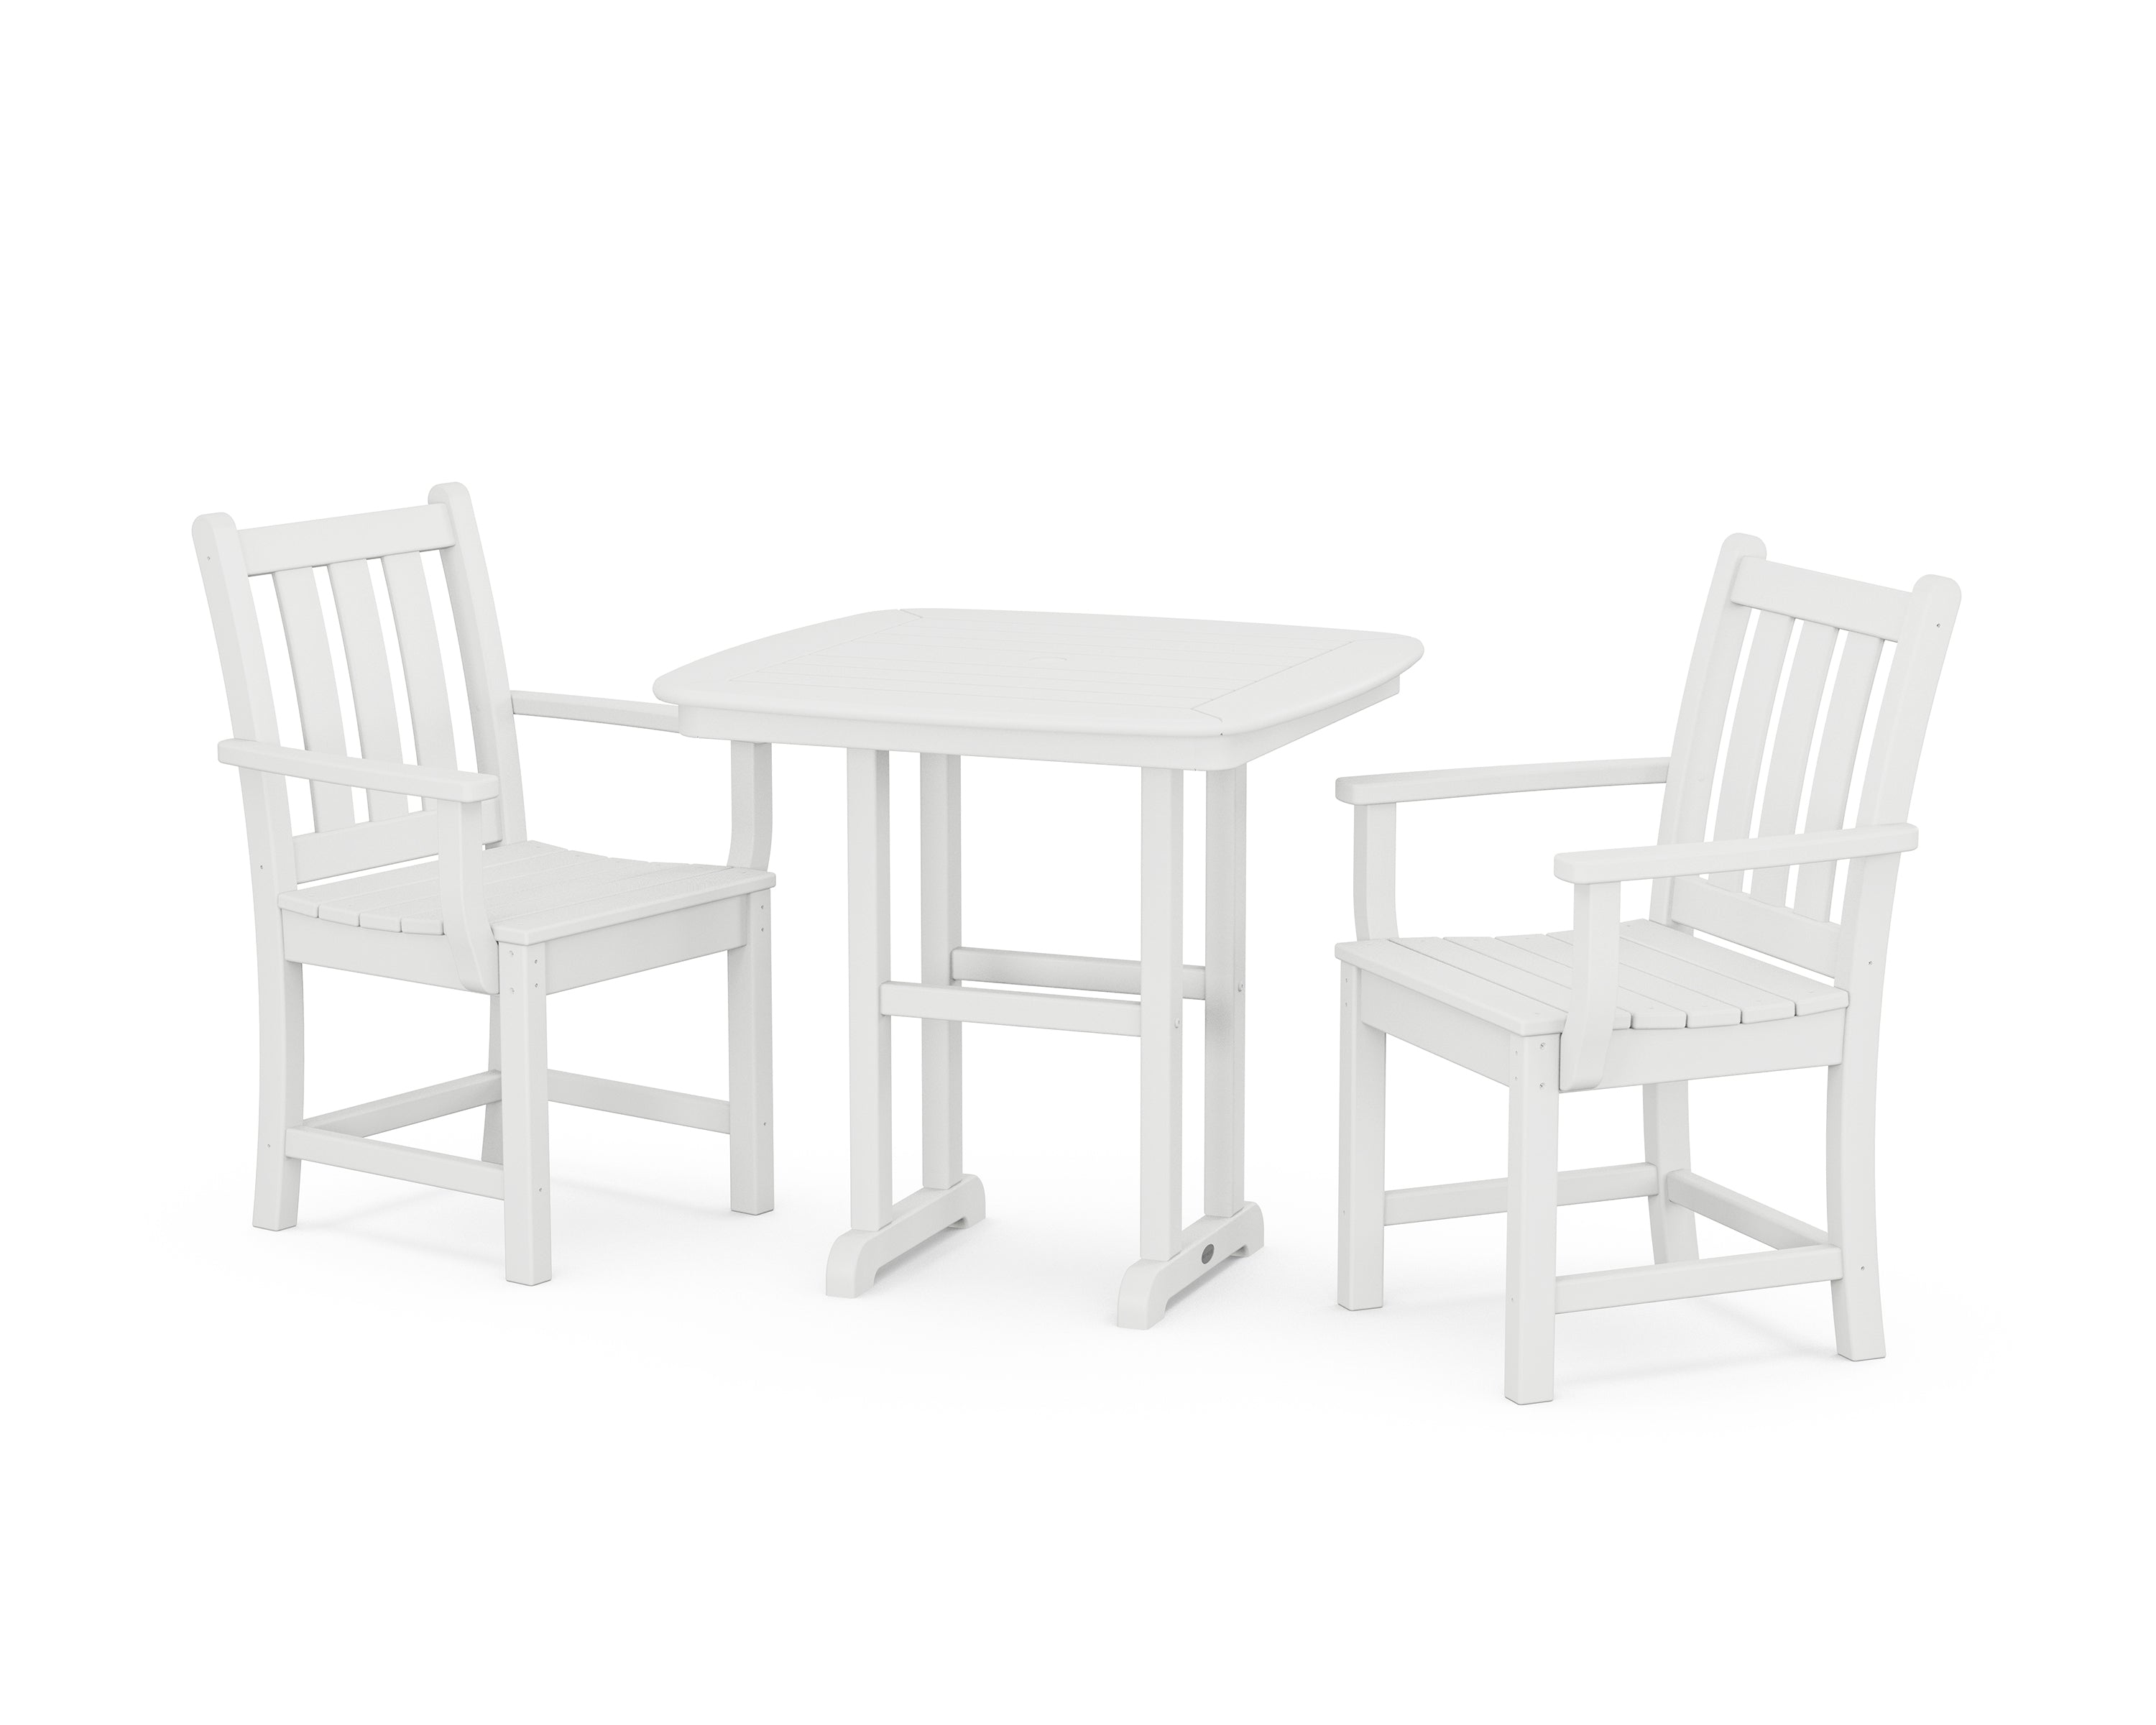 POLYWOOD® Traditional Garden 3-Piece Dining Set in White